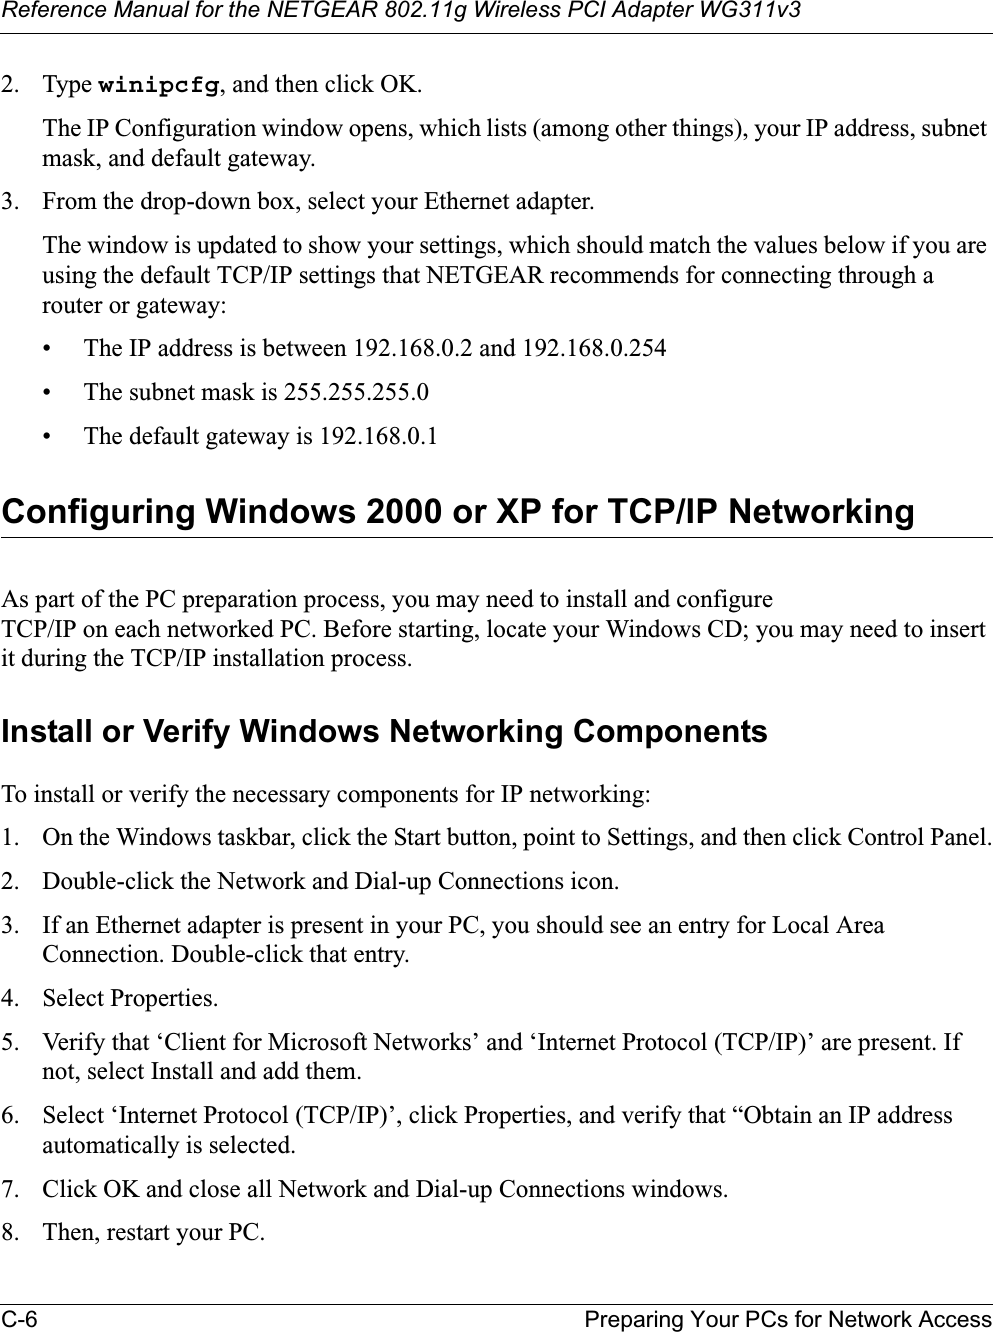 Reference Manual for the NETGEAR 802.11g Wireless PCI Adapter WG311v3C-6 Preparing Your PCs for Network Access2. Type winipcfg, and then click OK.The IP Configuration window opens, which lists (among other things), your IP address, subnet mask, and default gateway.3. From the drop-down box, select your Ethernet adapter.The window is updated to show your settings, which should match the values below if you are using the default TCP/IP settings that NETGEAR recommends for connecting through a router or gateway:• The IP address is between 192.168.0.2 and 192.168.0.254• The subnet mask is 255.255.255.0• The default gateway is 192.168.0.1Configuring Windows 2000 or XP for TCP/IP NetworkingAs part of the PC preparation process, you may need to install and configure TCP/IP on each networked PC. Before starting, locate your Windows CD; you may need to insert it during the TCP/IP installation process.Install or Verify Windows Networking ComponentsTo install or verify the necessary components for IP networking:1. On the Windows taskbar, click the Start button, point to Settings, and then click Control Panel.2. Double-click the Network and Dial-up Connections icon.3. If an Ethernet adapter is present in your PC, you should see an entry for Local Area Connection. Double-click that entry.4. Select Properties.5. Verify that ‘Client for Microsoft Networks’ and ‘Internet Protocol (TCP/IP)’ are present. If not, select Install and add them.6. Select ‘Internet Protocol (TCP/IP)’, click Properties, and verify that “Obtain an IP address automatically is selected.7. Click OK and close all Network and Dial-up Connections windows.8. Then, restart your PC.